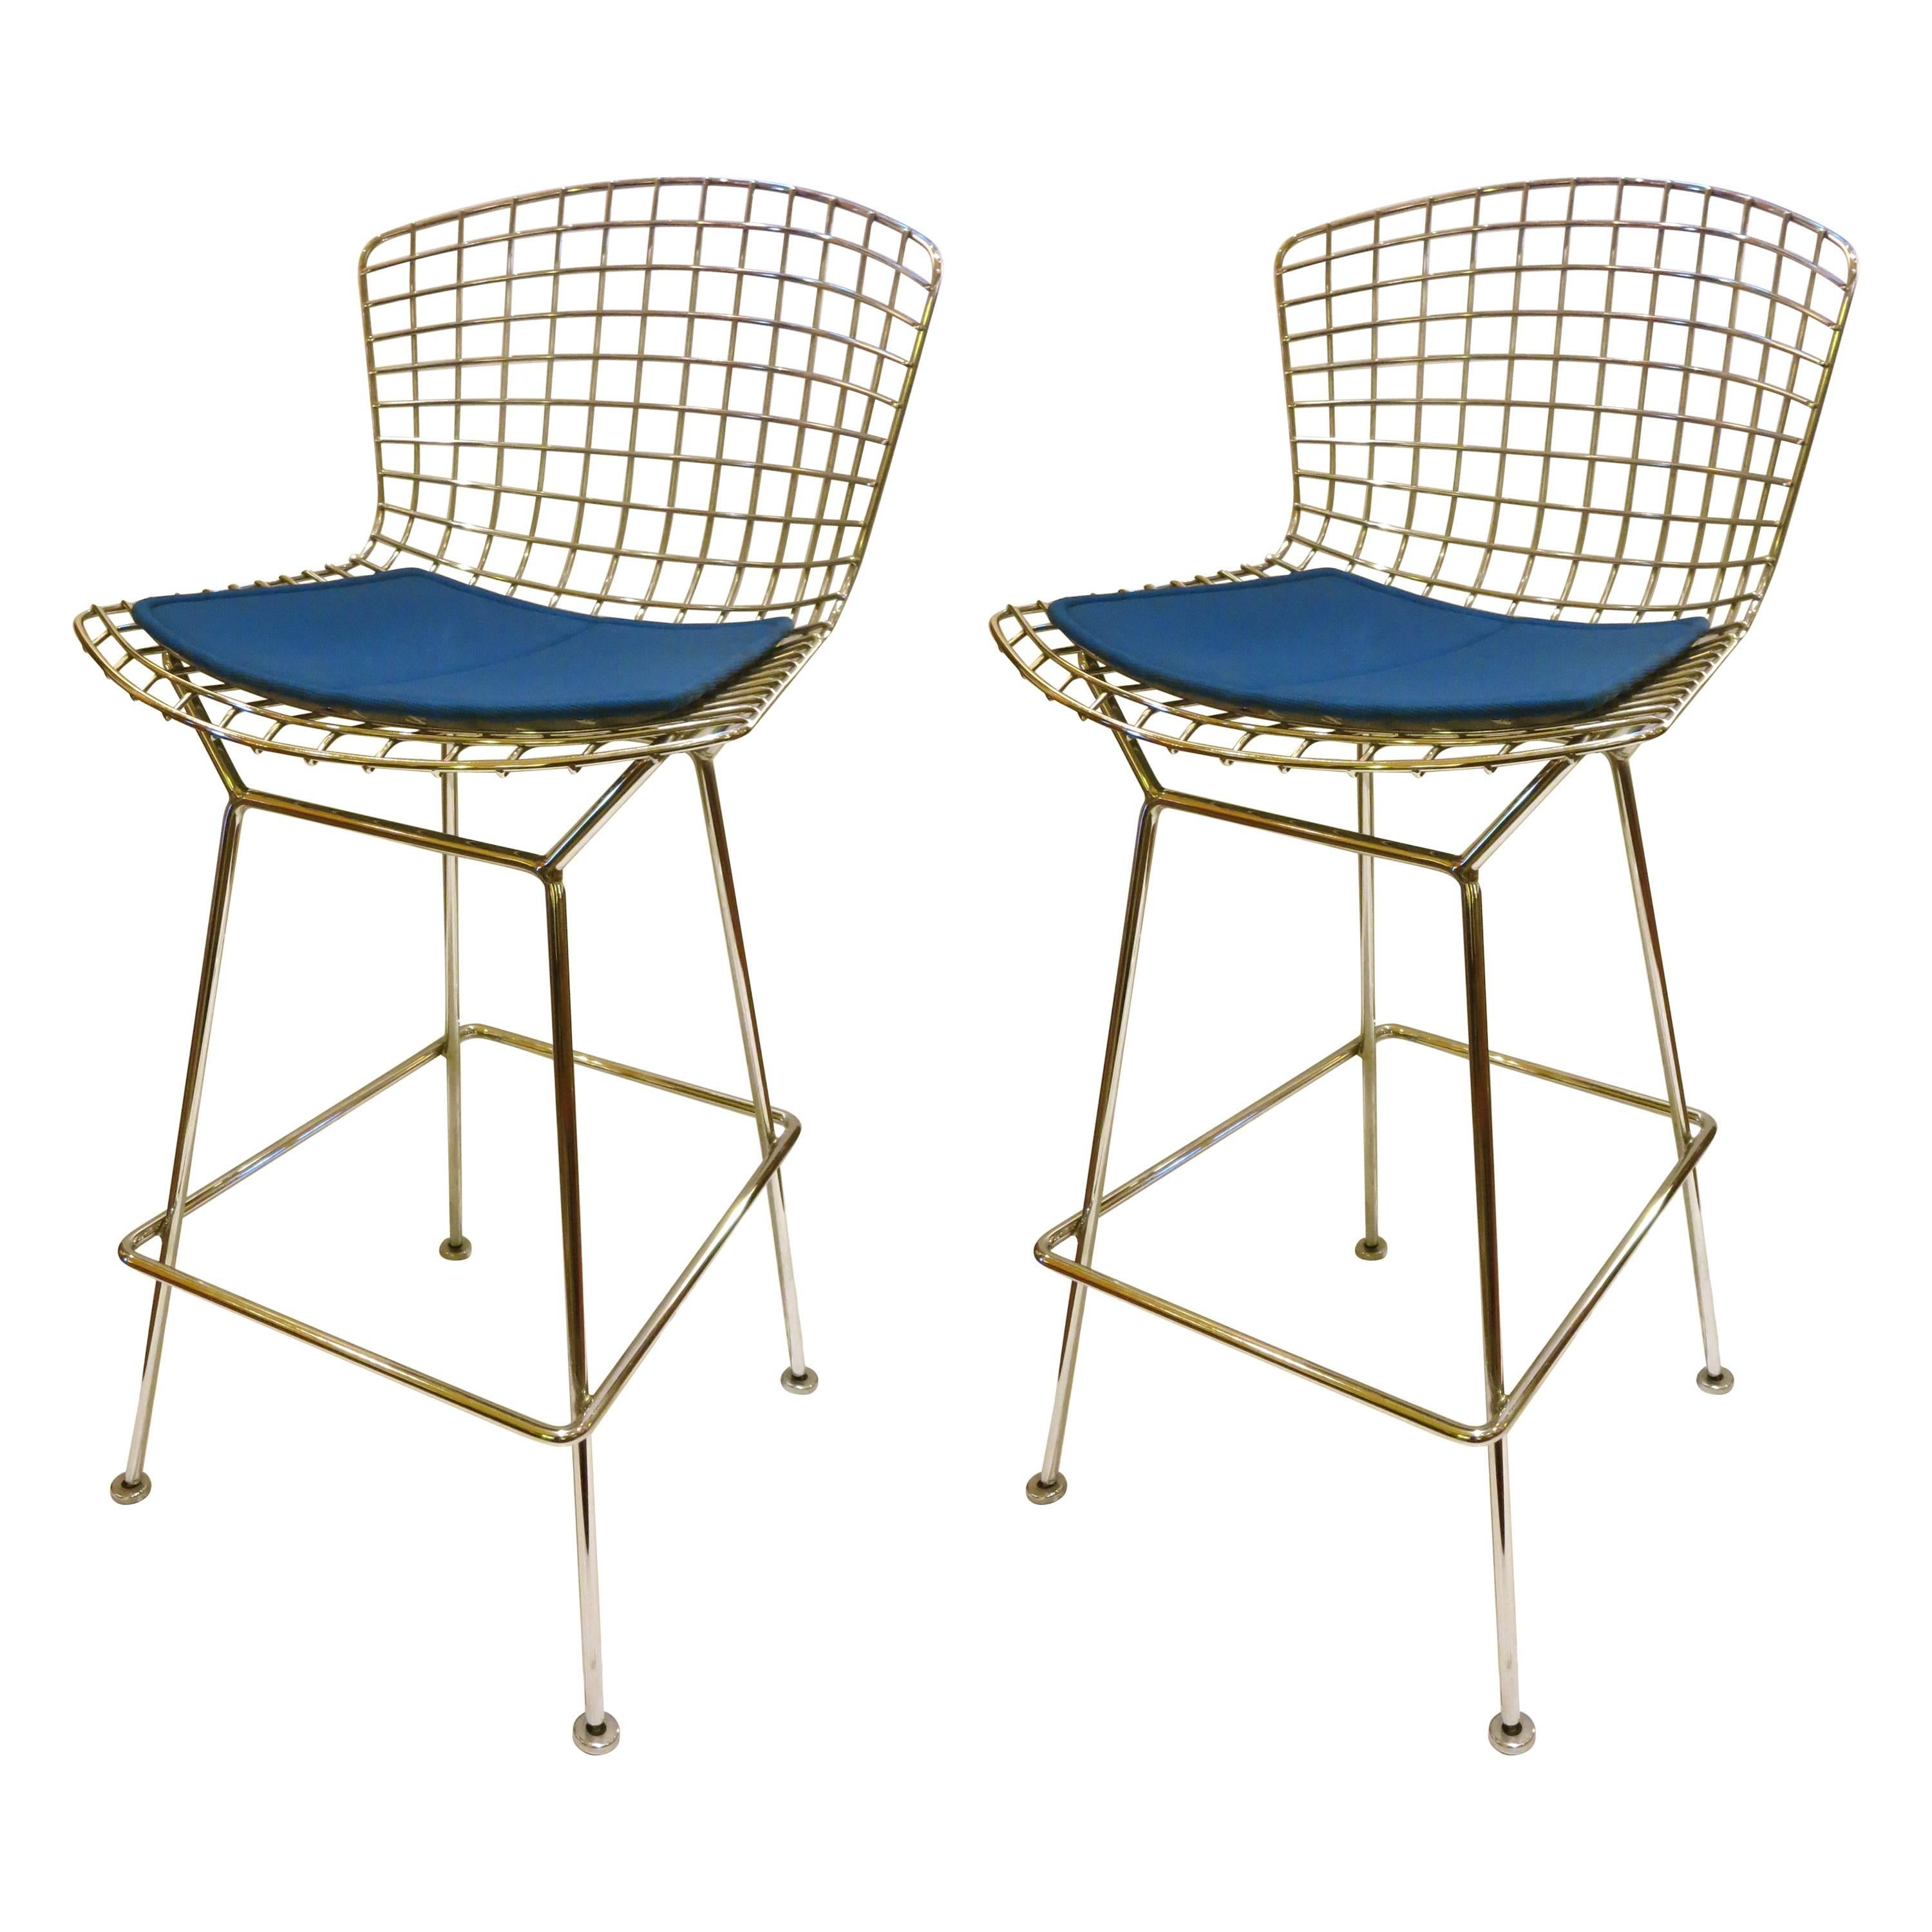 Pair of Barstools Designed by Harry Bertoia for Knoll with Blue Cloth Pads